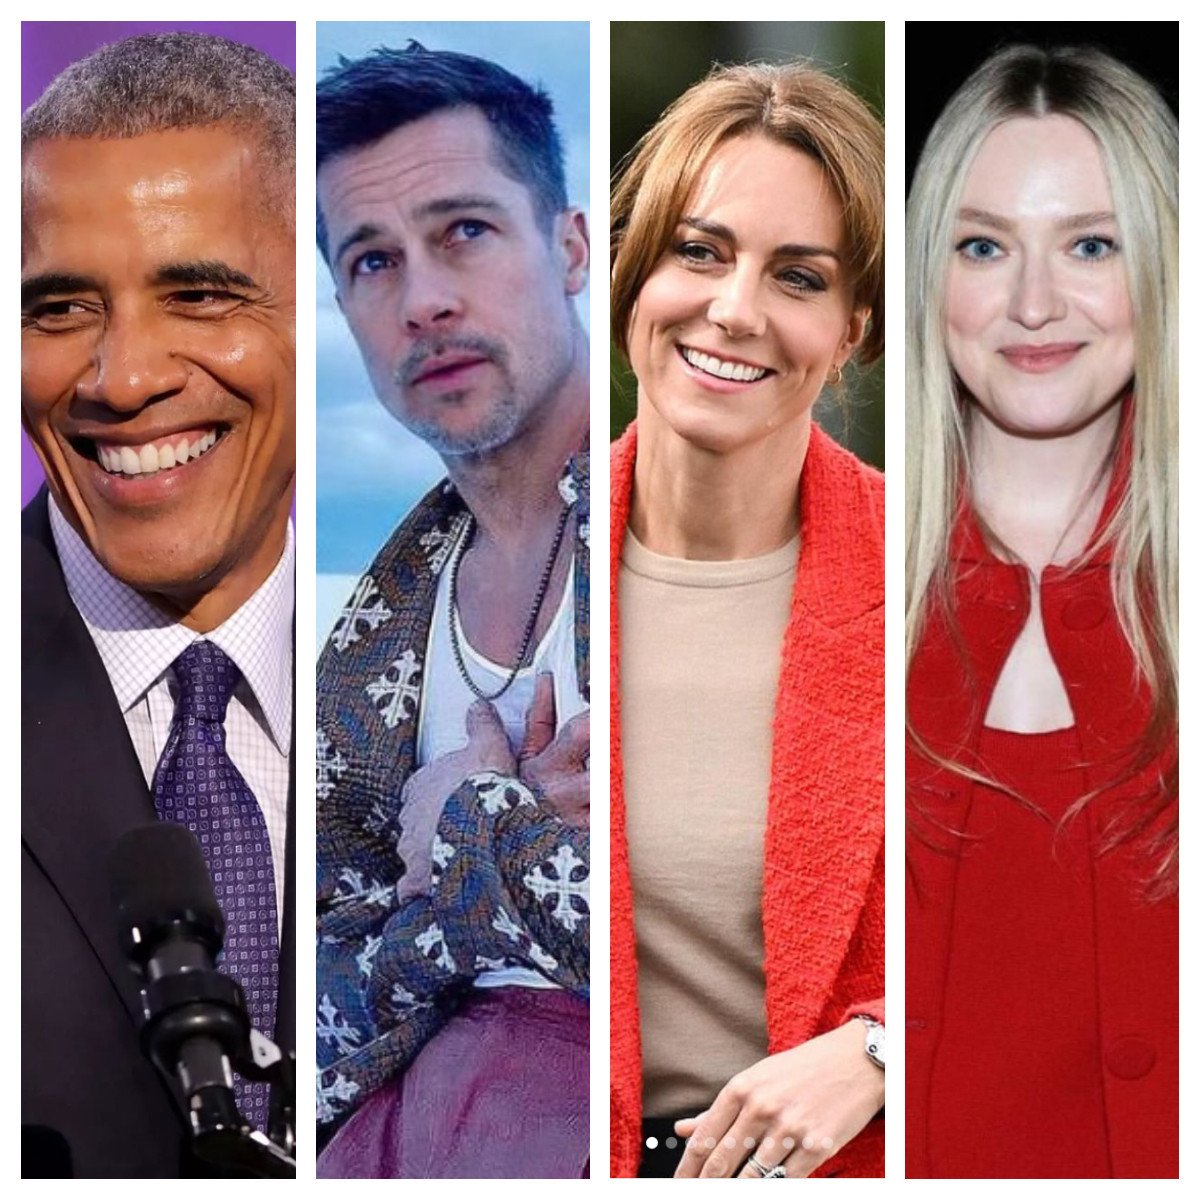 Barack Obama and Brad Pitt have a common ancestor, while Kate Middleton and Dakota Fanning are both descendants of King Edward III. Photos: @blackinformationnetwork, @bradpittofflcial, @hrh_princesscatherineofwales, @fanningoutfit/Instagram